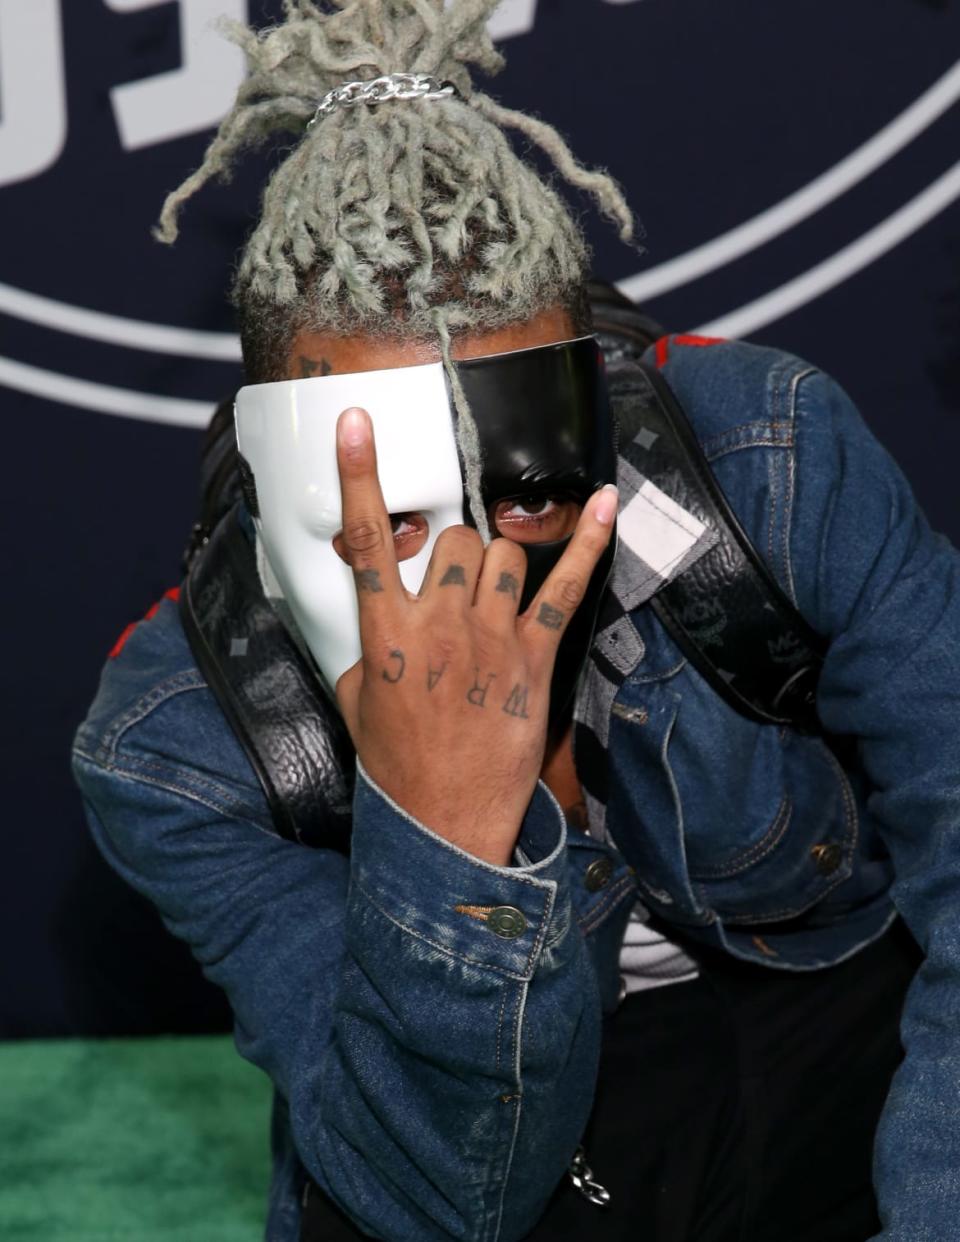 <div class="inline-image__caption"><p>Rapper XXXTentacion attends the BET Hip Hop Awards 2017 at The Fillmore Miami Beach on Oct. 6, 2017, in Miami Beach, Florida.</p></div> <div class="inline-image__credit">Bennett Raglin/Getty</div>